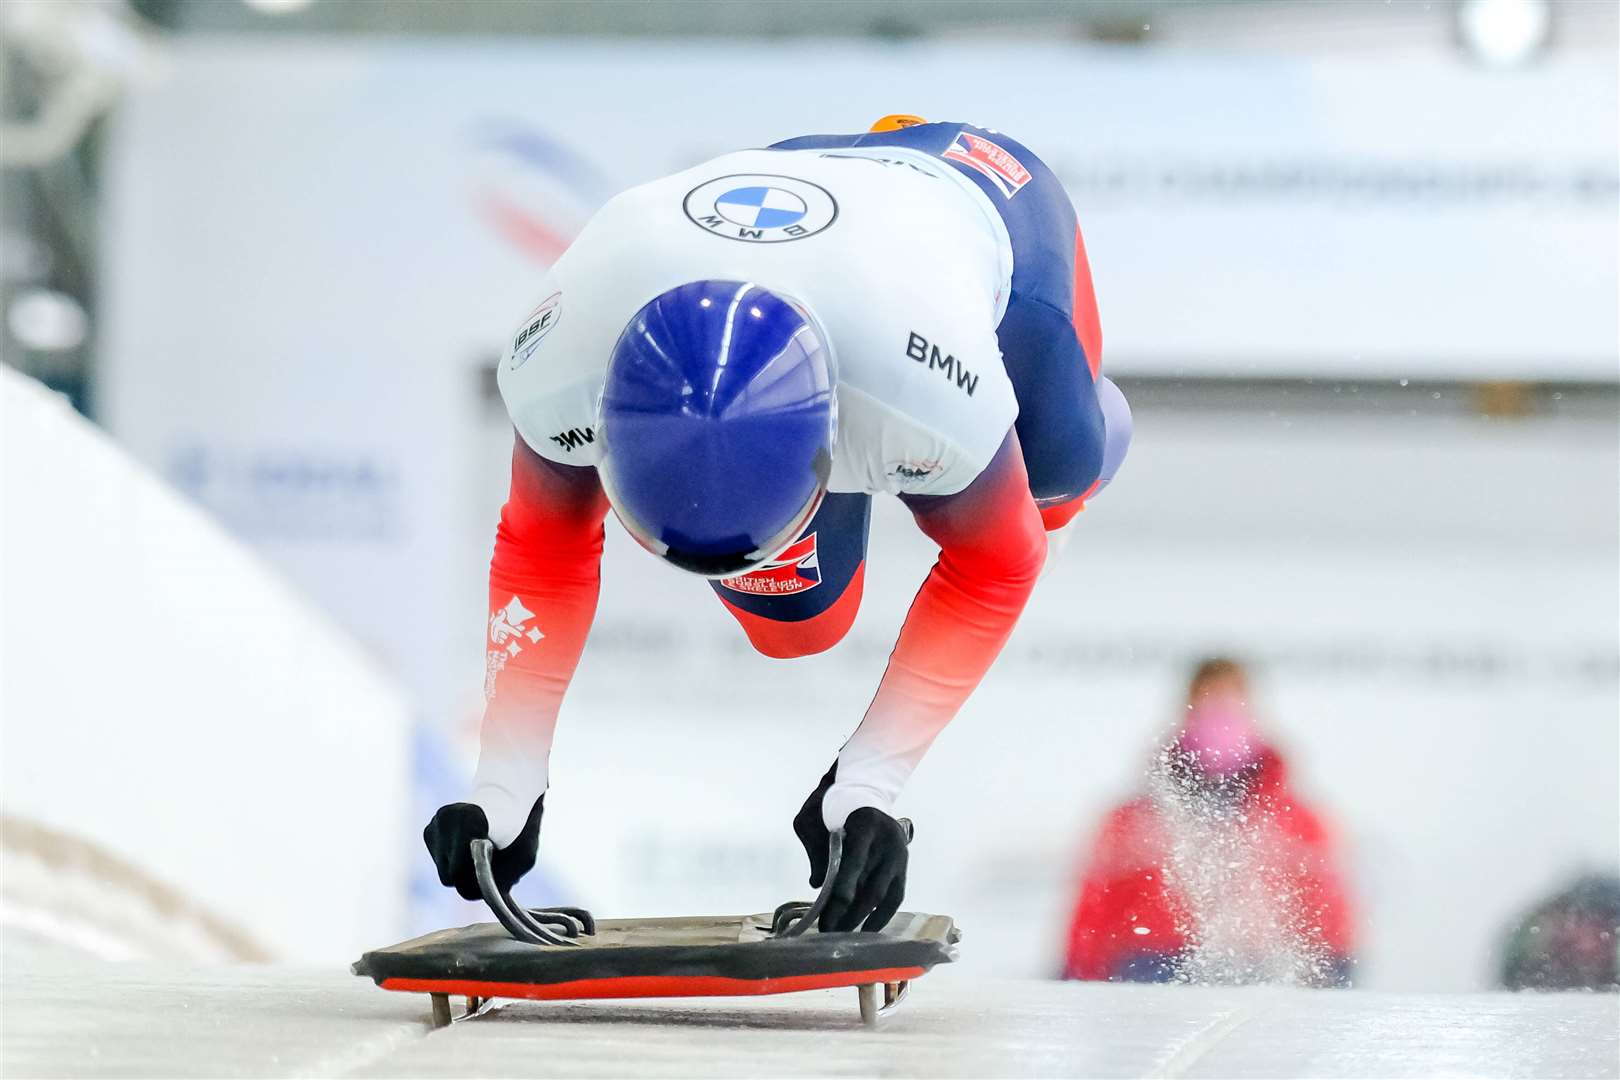 Matt Weston finished 15th in the Winter Olympics for Team GB